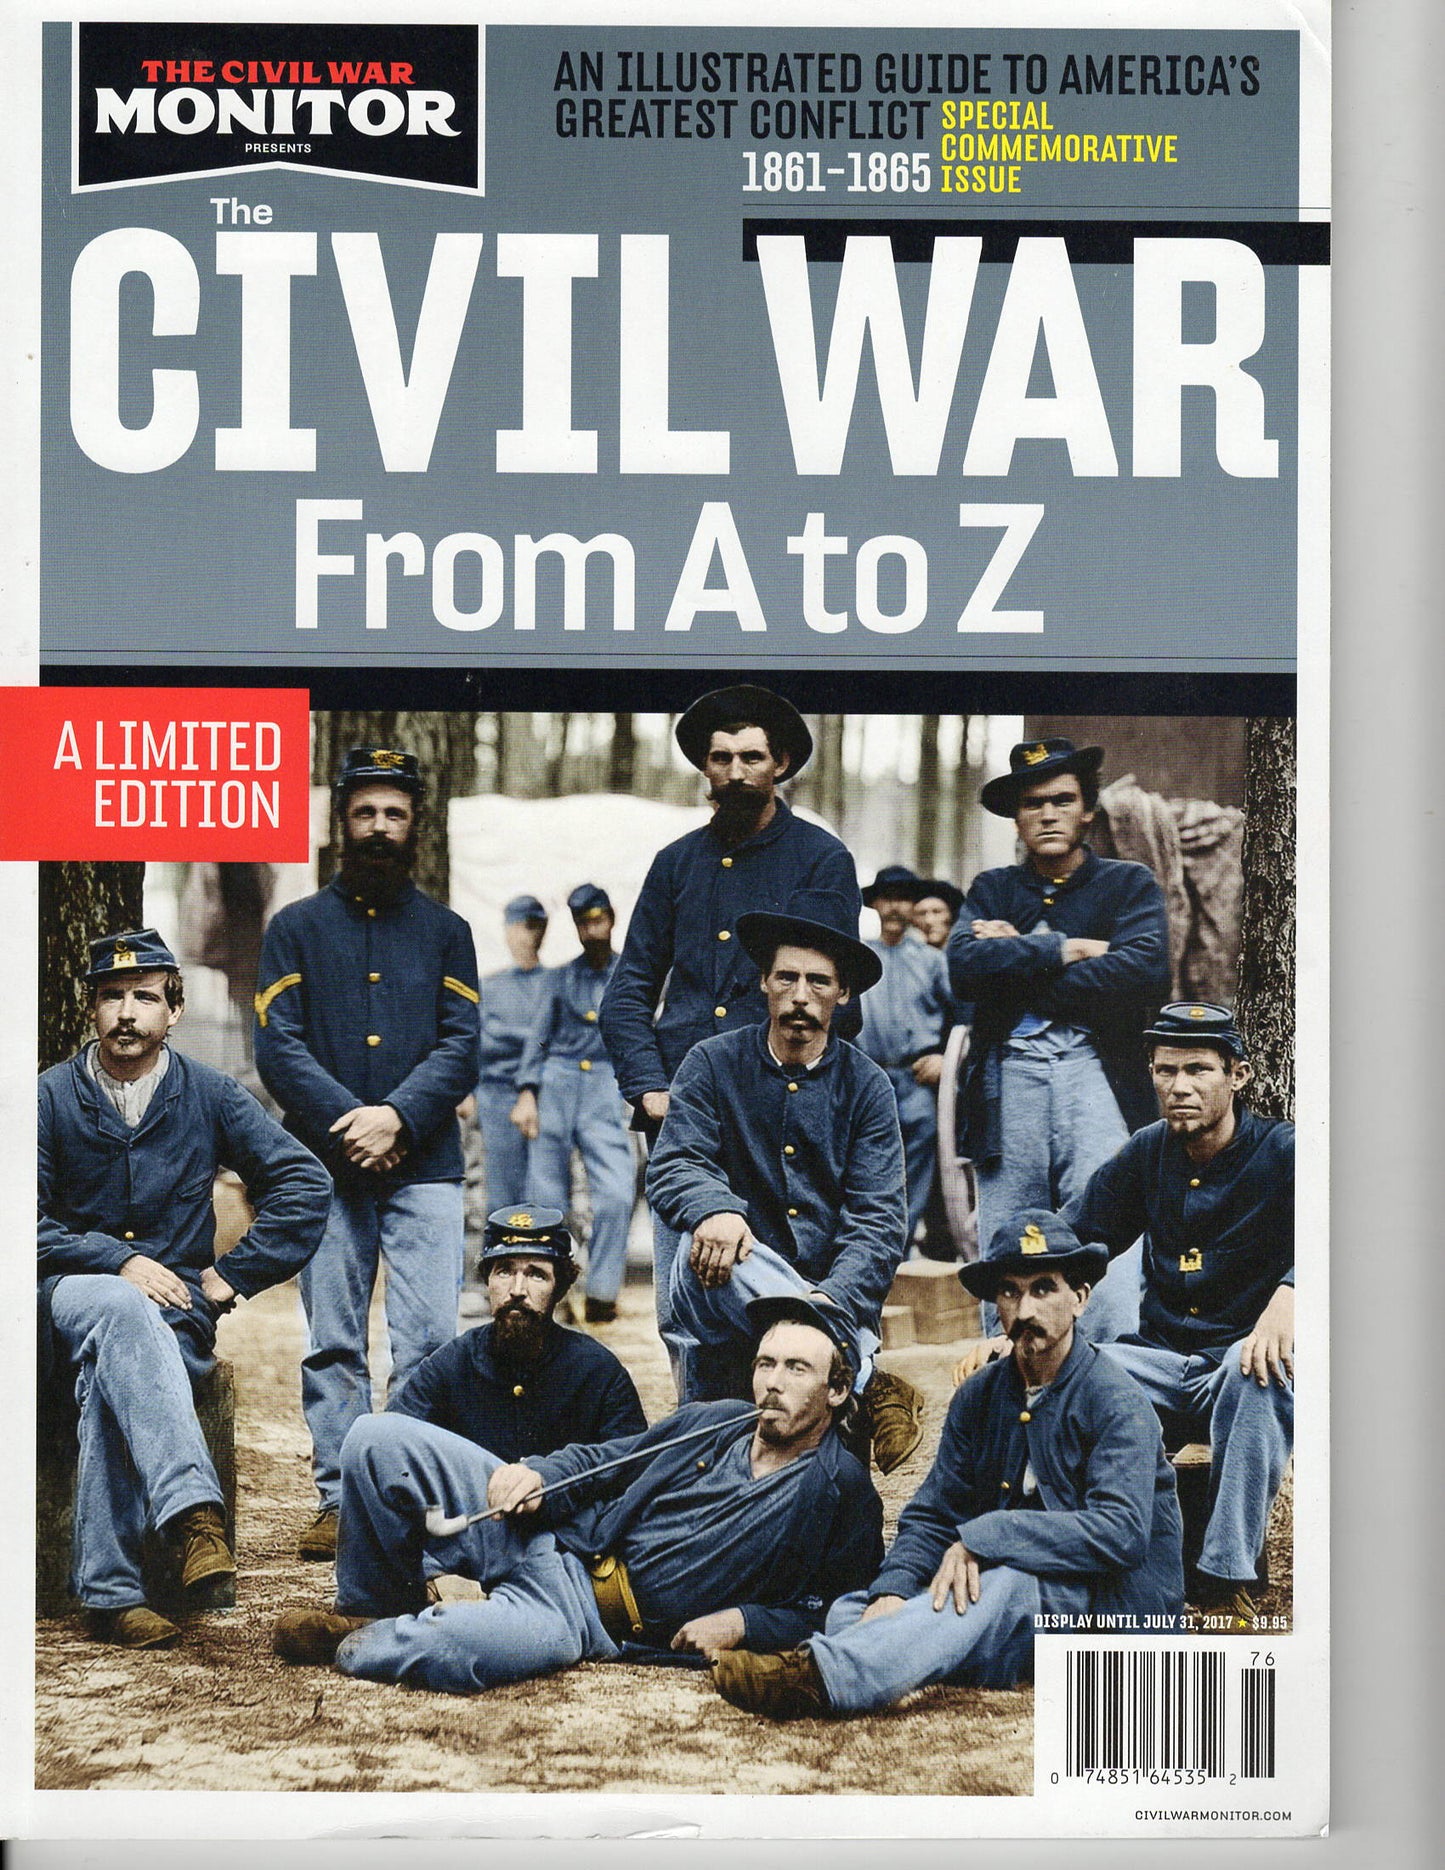 07 31 2017 The Civil War Monitor - Civil War From A to Z